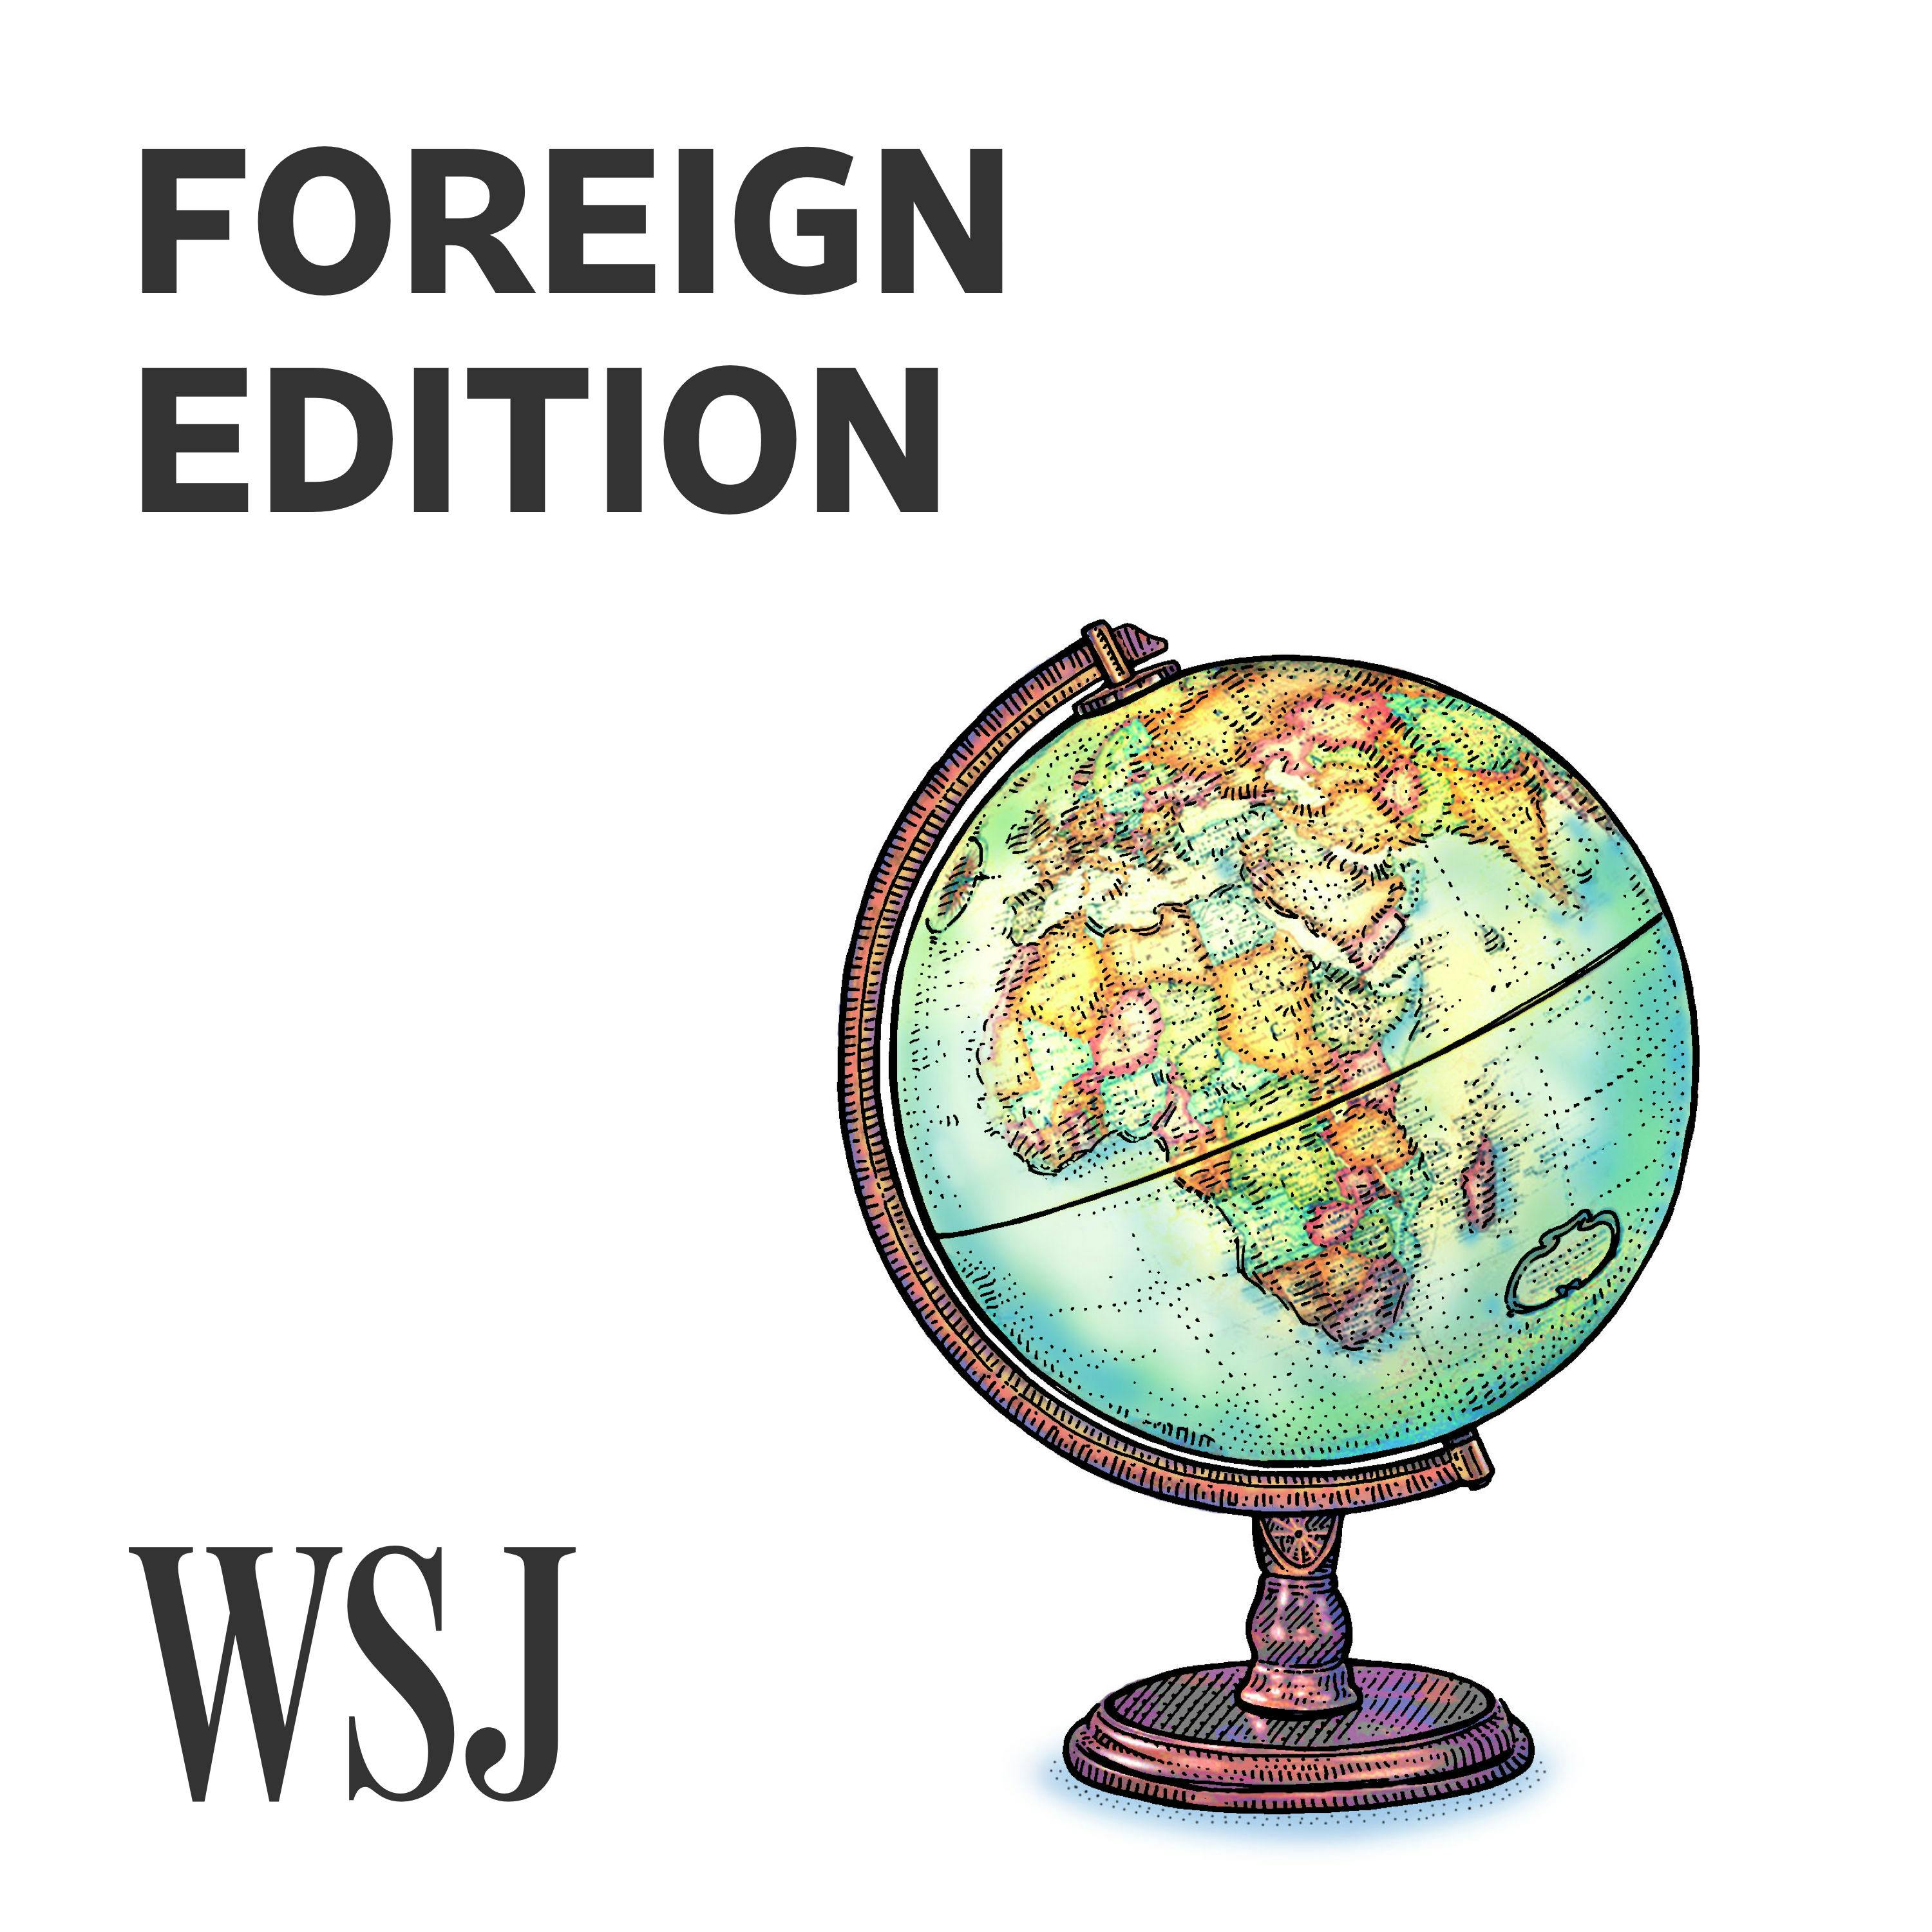 WSJ Opinion: Foreign Edition:The Wall Street Journal